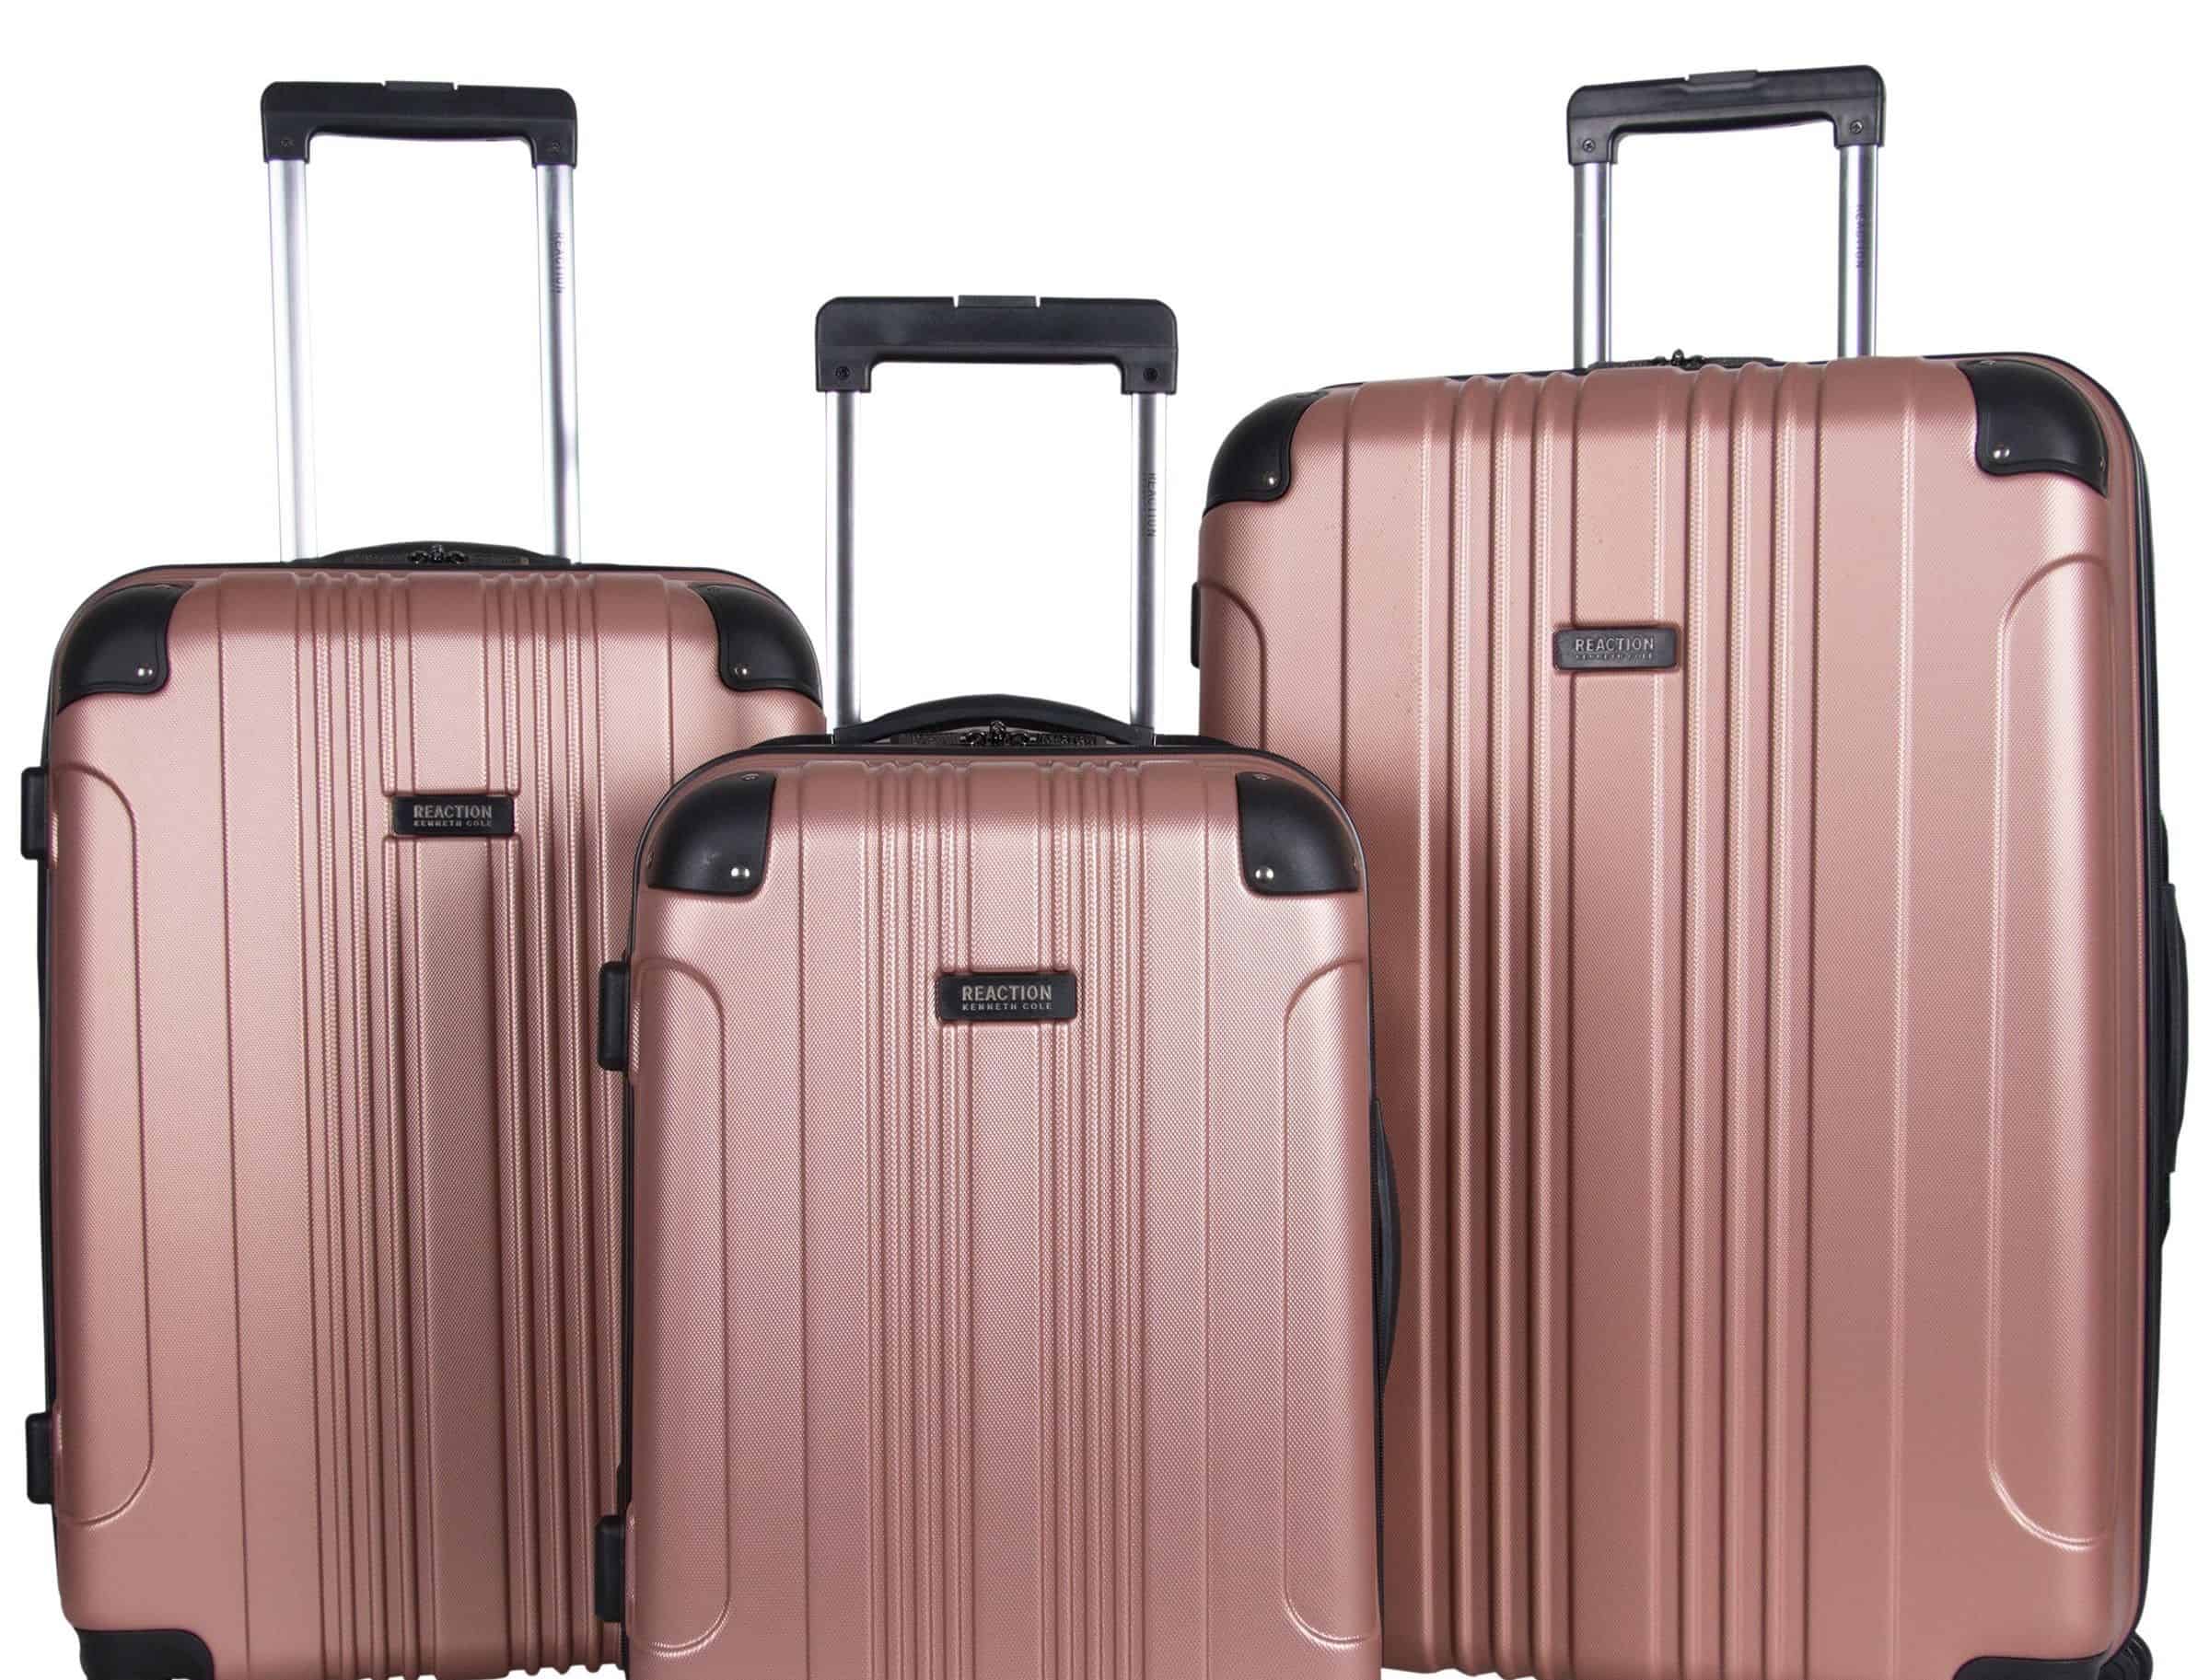 Kenneth Cole Reaction Out of Bounds 20″ Spinner Carry-On Luggage Review